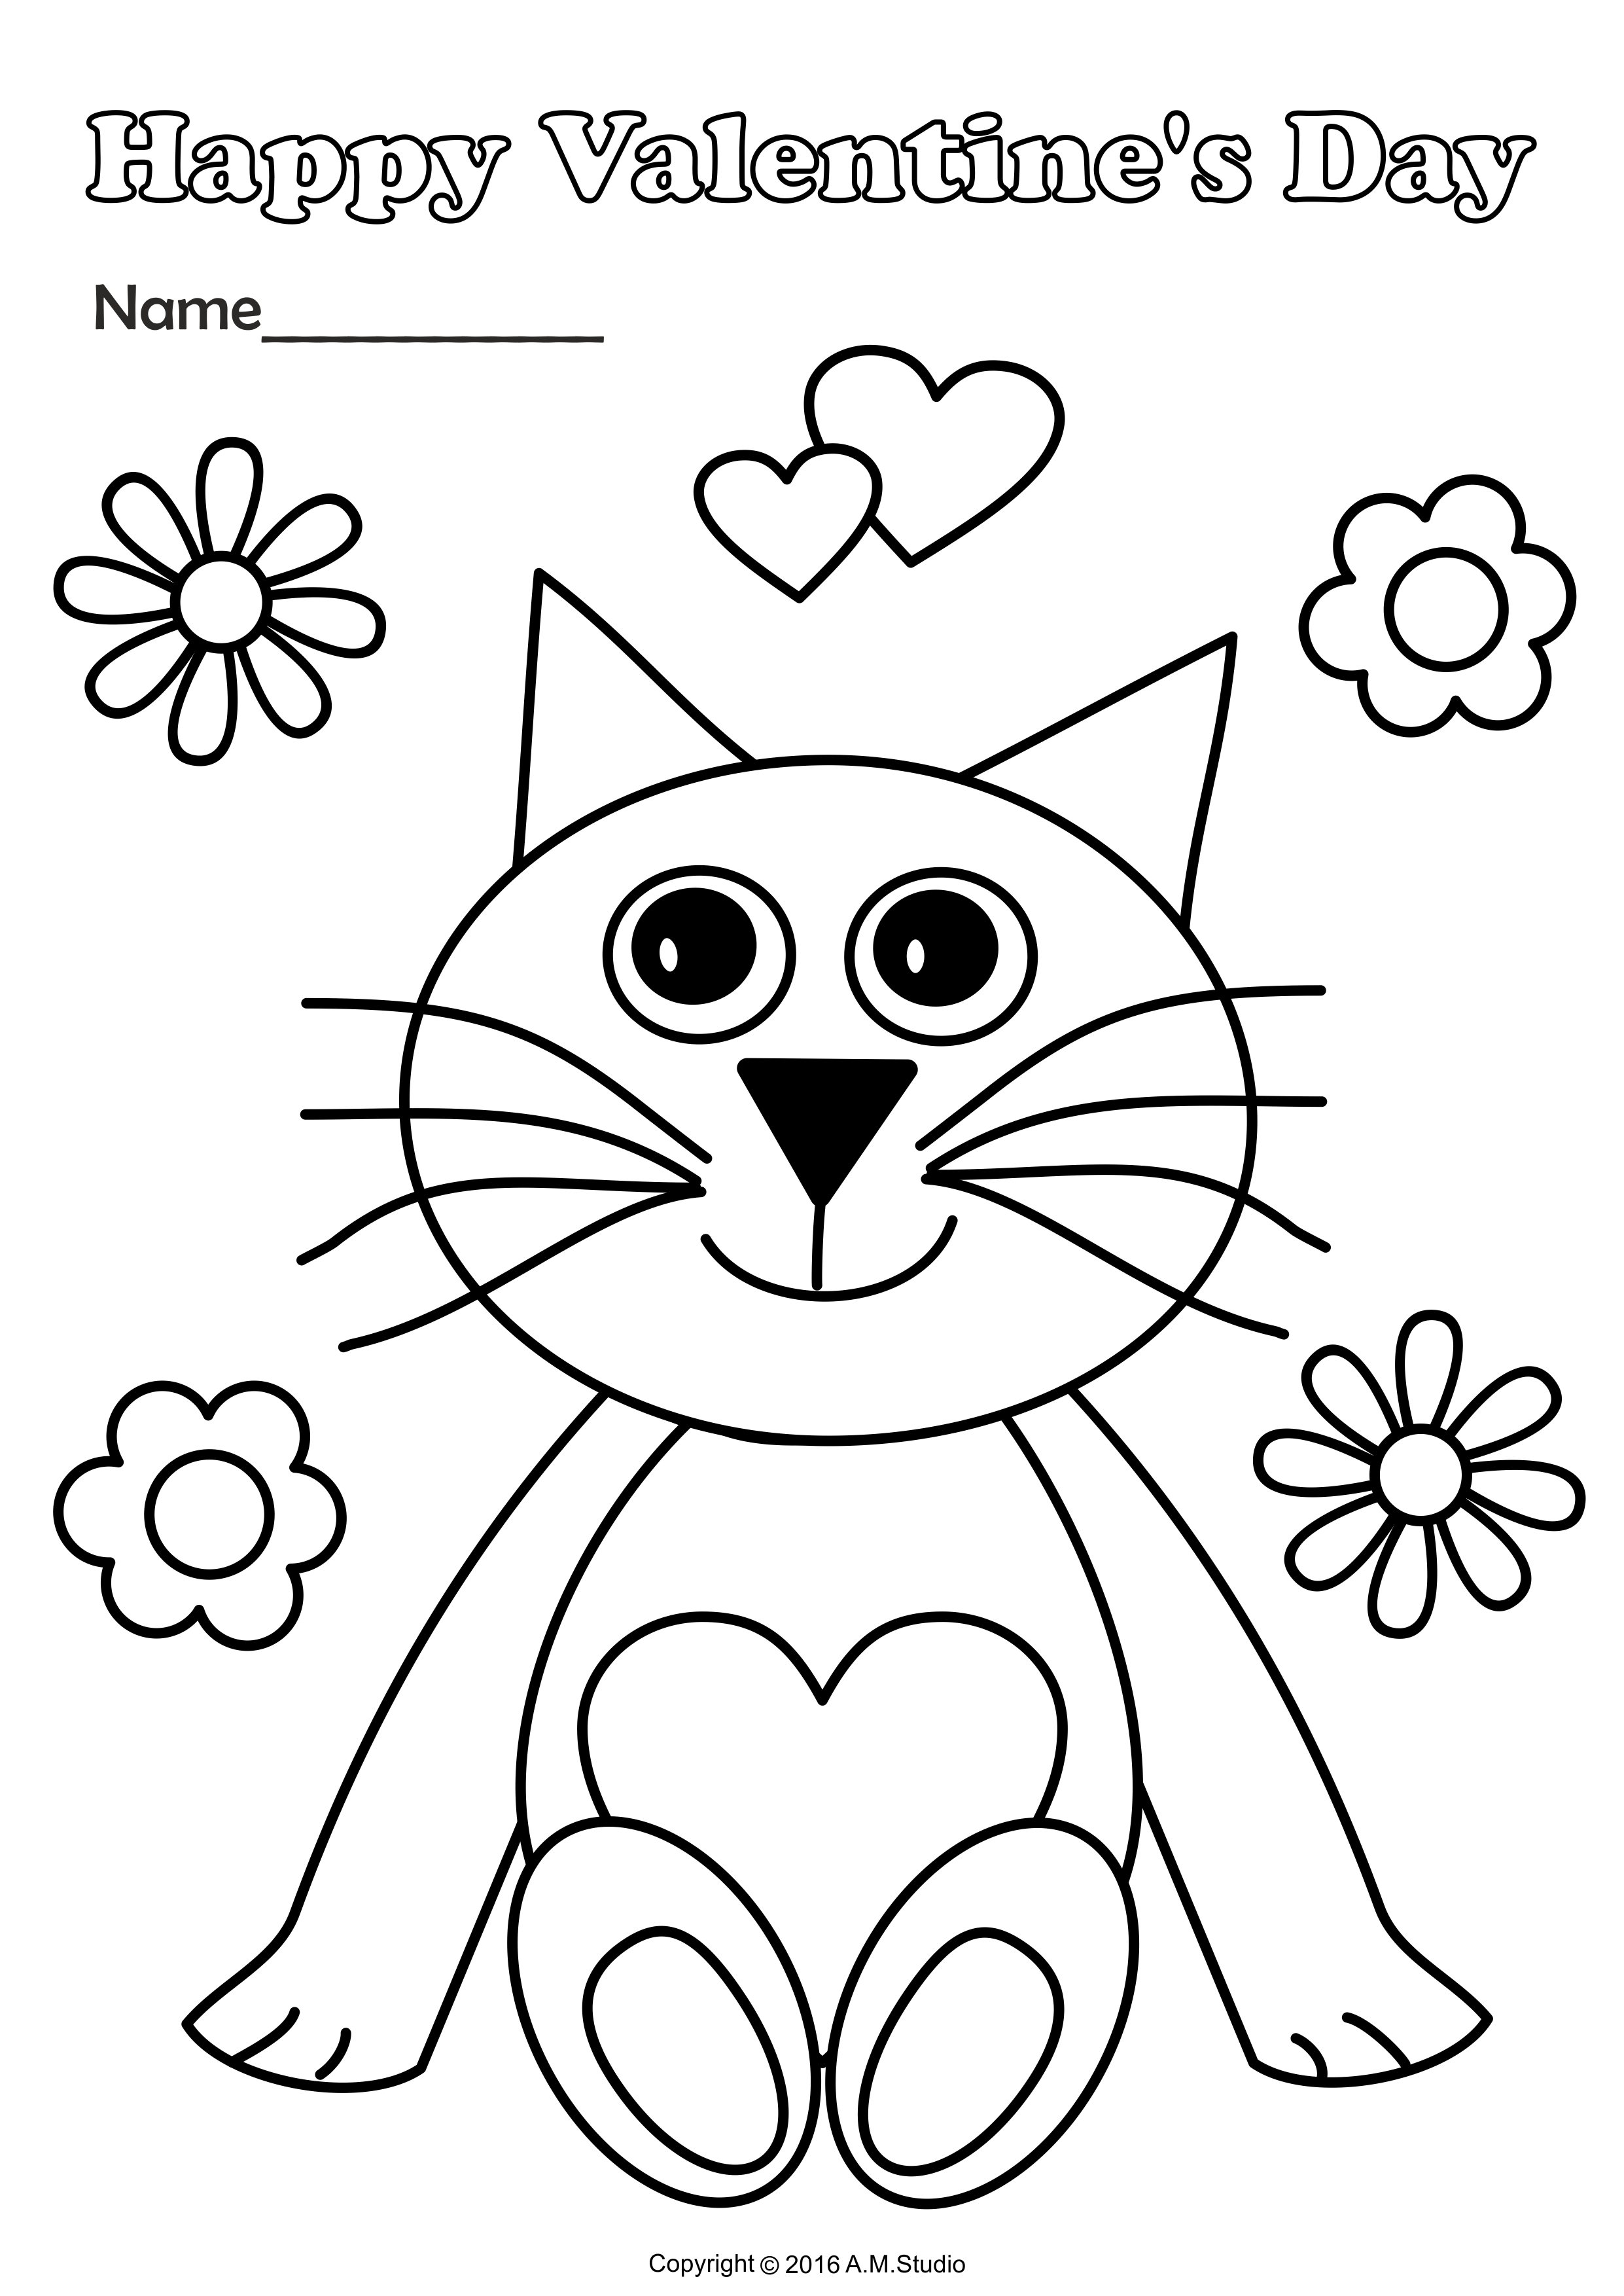 Valentine`s Day Printable Coloring Pages for Kids (img # 3)